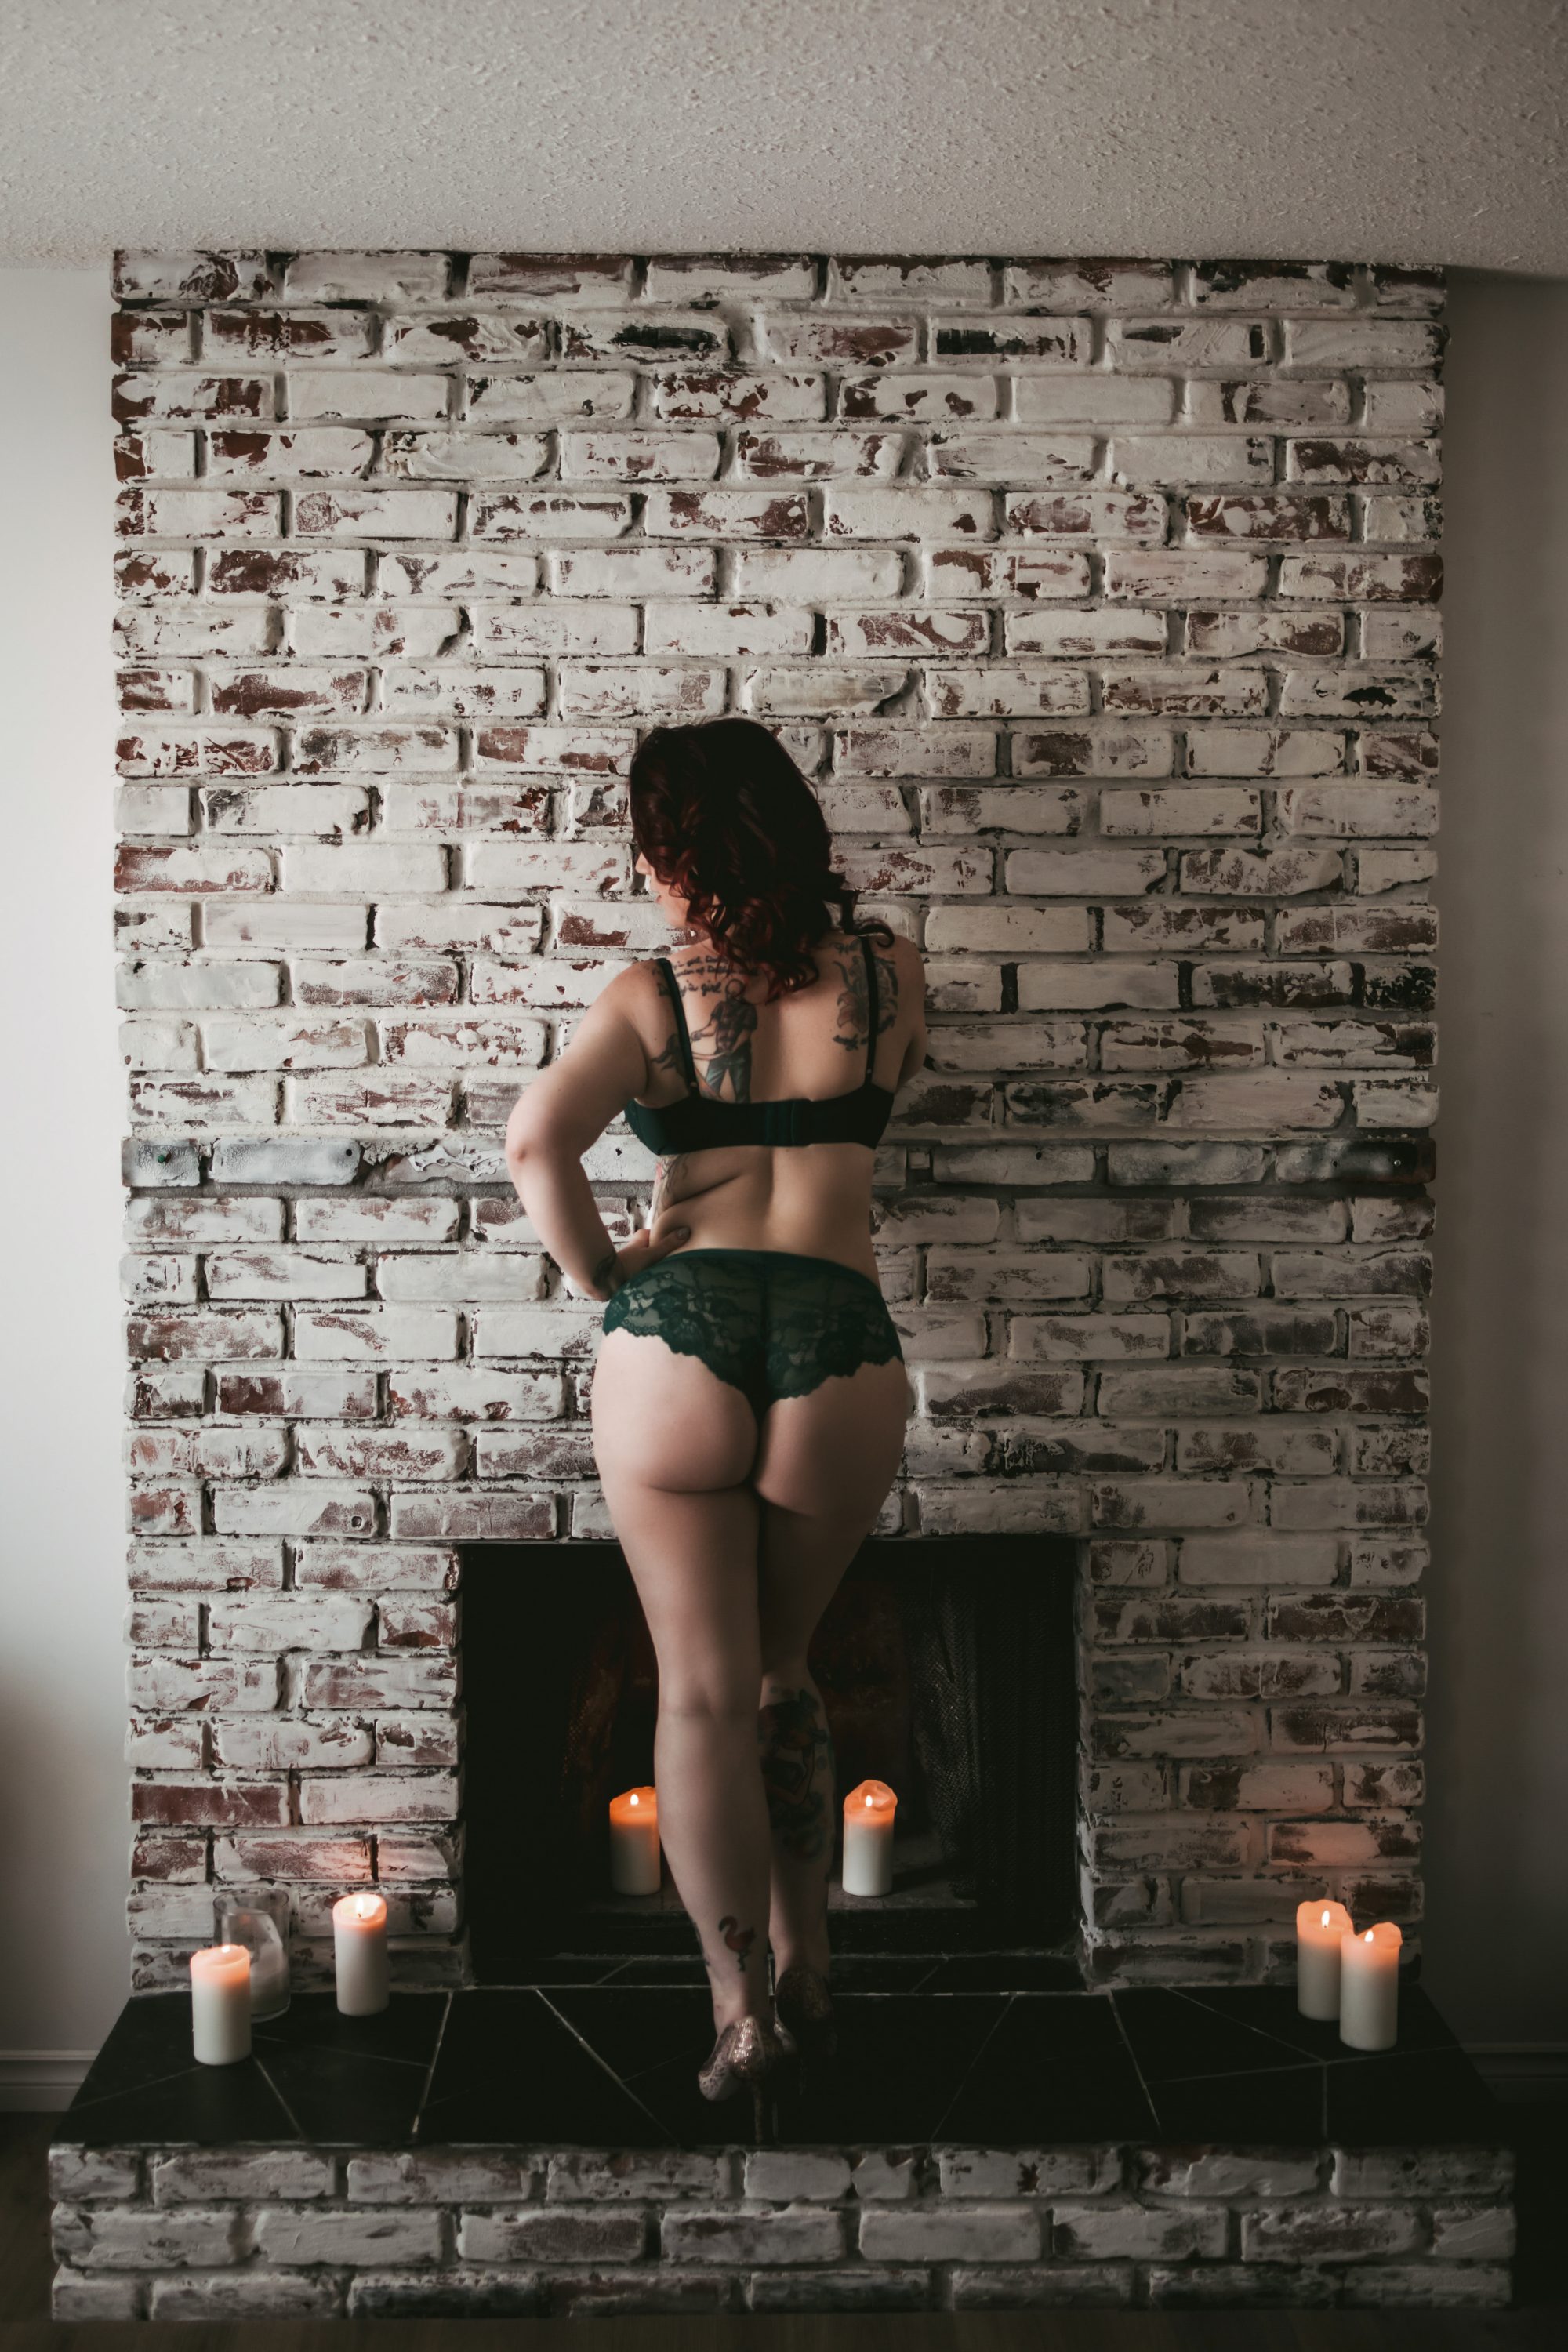 You wanna do a boudoir shoot but have no idea what to wear for your curvy hourglass figure. We've got you covered!